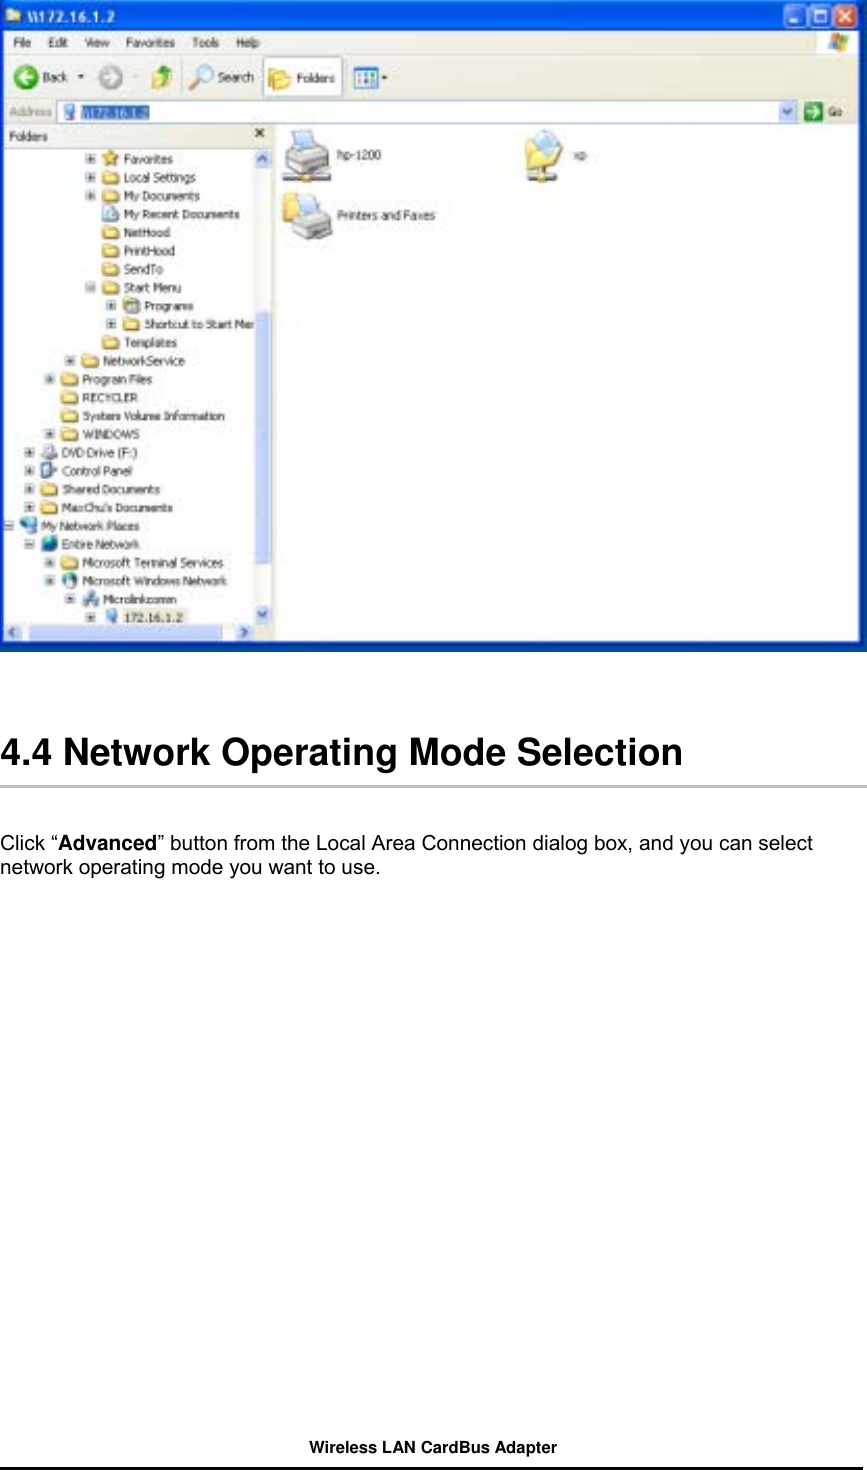   4.4 Network Operating Mode Selection   Click “Advanced” button from the Local Area Connection dialog box, and you can select network operating mode you want to use.   Wireless LAN CardBus Adapter 